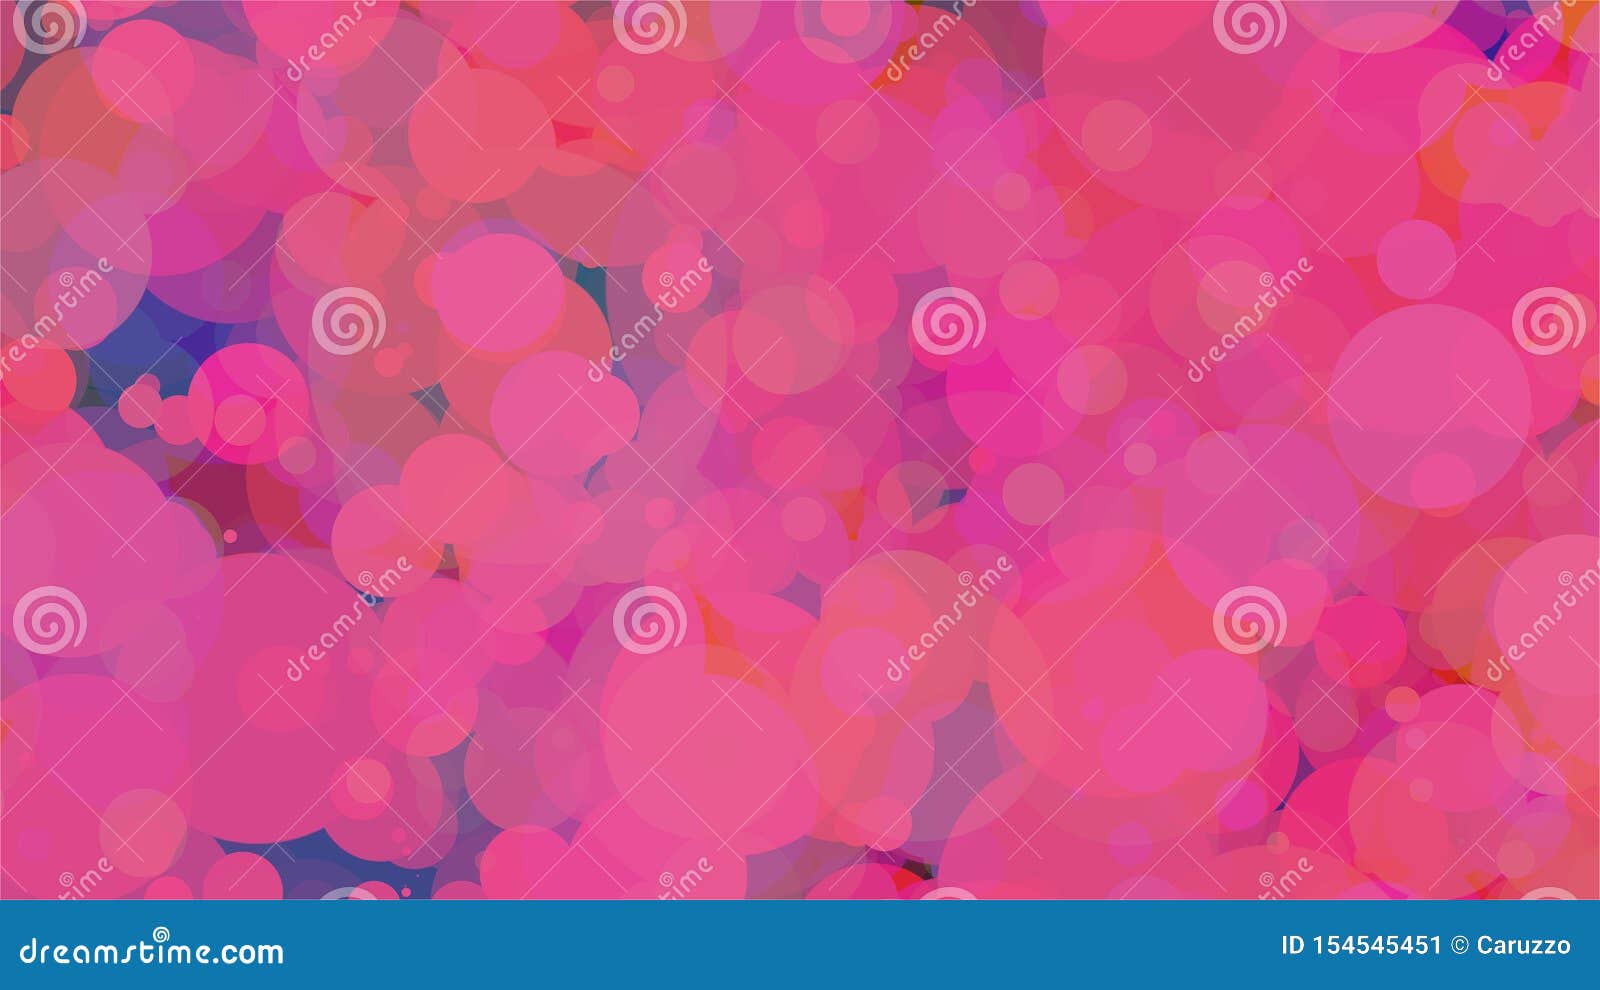 Red Bubble Composition 8k Background Stock Illustration